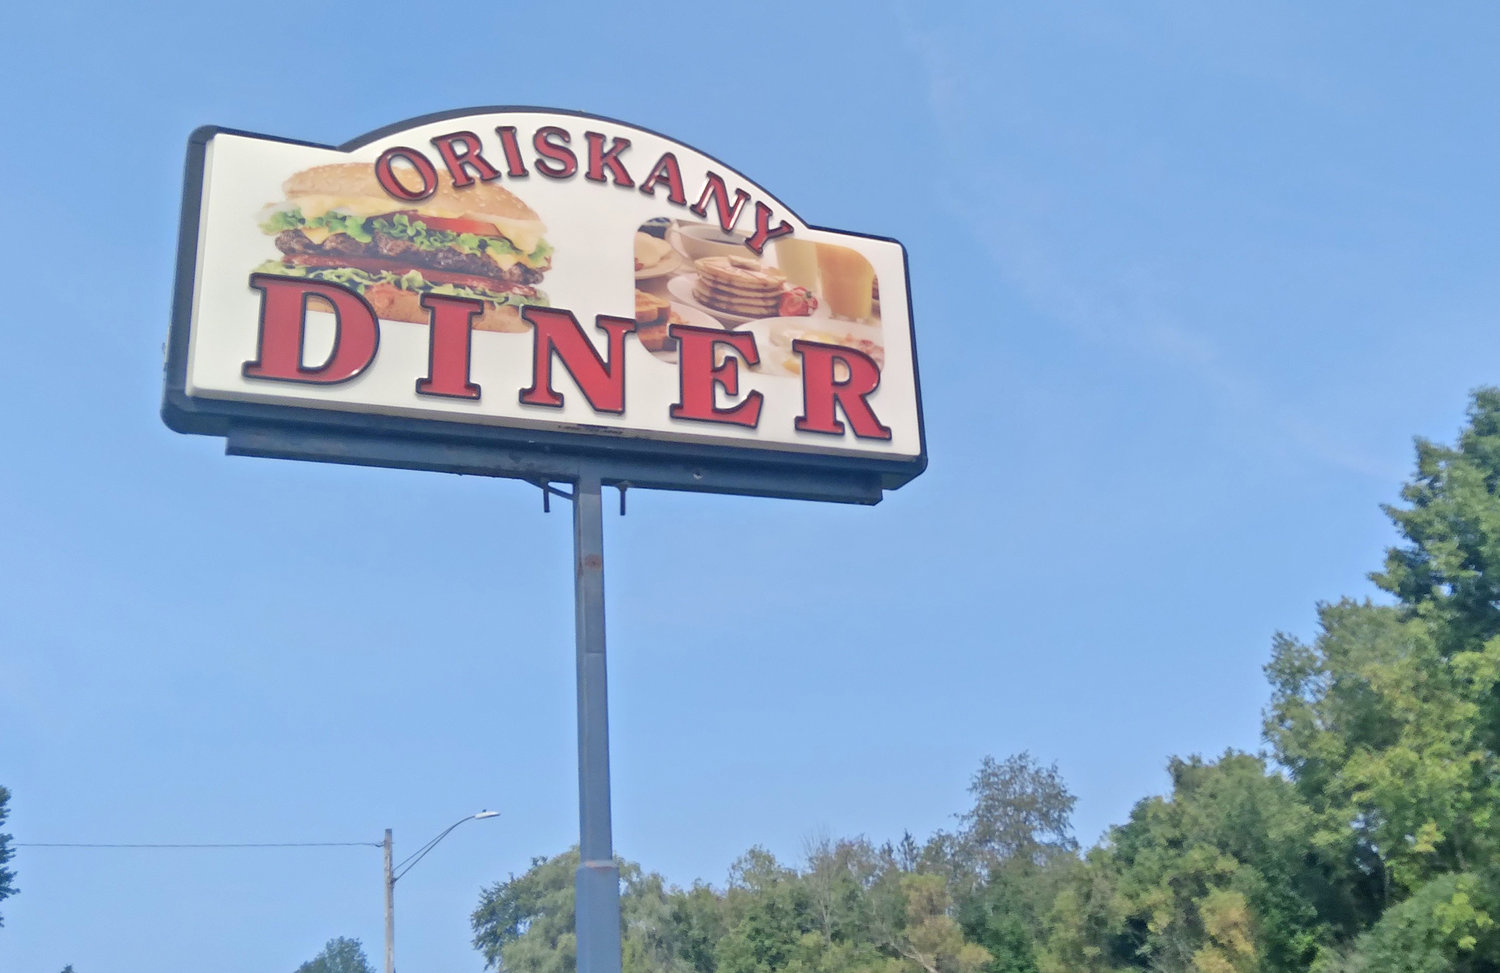 ROSIE'S — Rosie’s Oriskany Diner is located at 8404 NY State Route 69, Oriskany, NY 13424 and can be reached at 315-790-5395. They can also be found and followed via their Facebook page. Hours are Wednesday through Saturday, 7 am to 2 pm, lunch begins at 11 am. Breakfast is served all day. Sunday hours are 7 am to 12 noon, breakfast only.